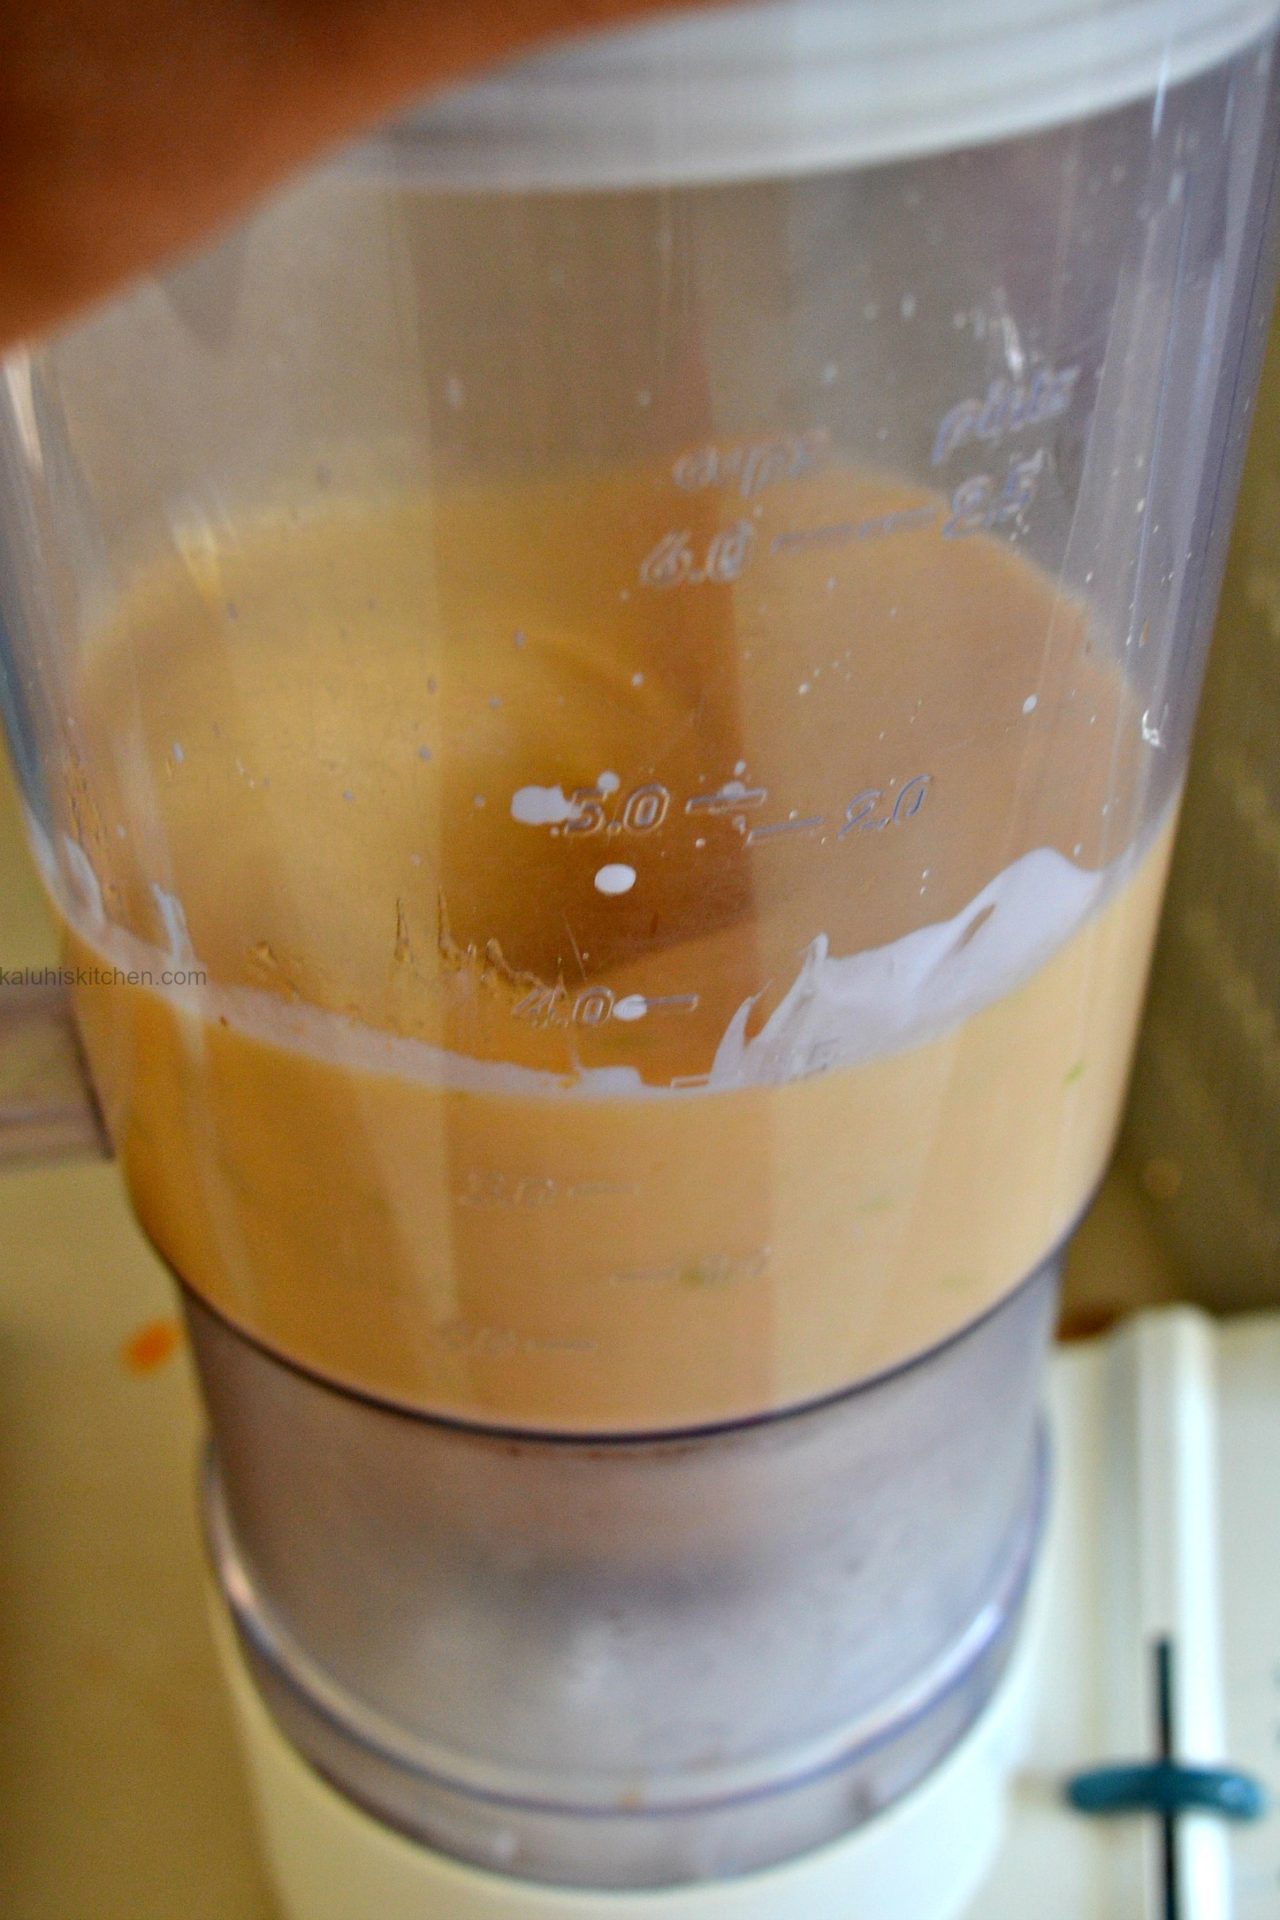 blend all the smoothie ingredients until smooth, if you prefer, you can sieve them before serving